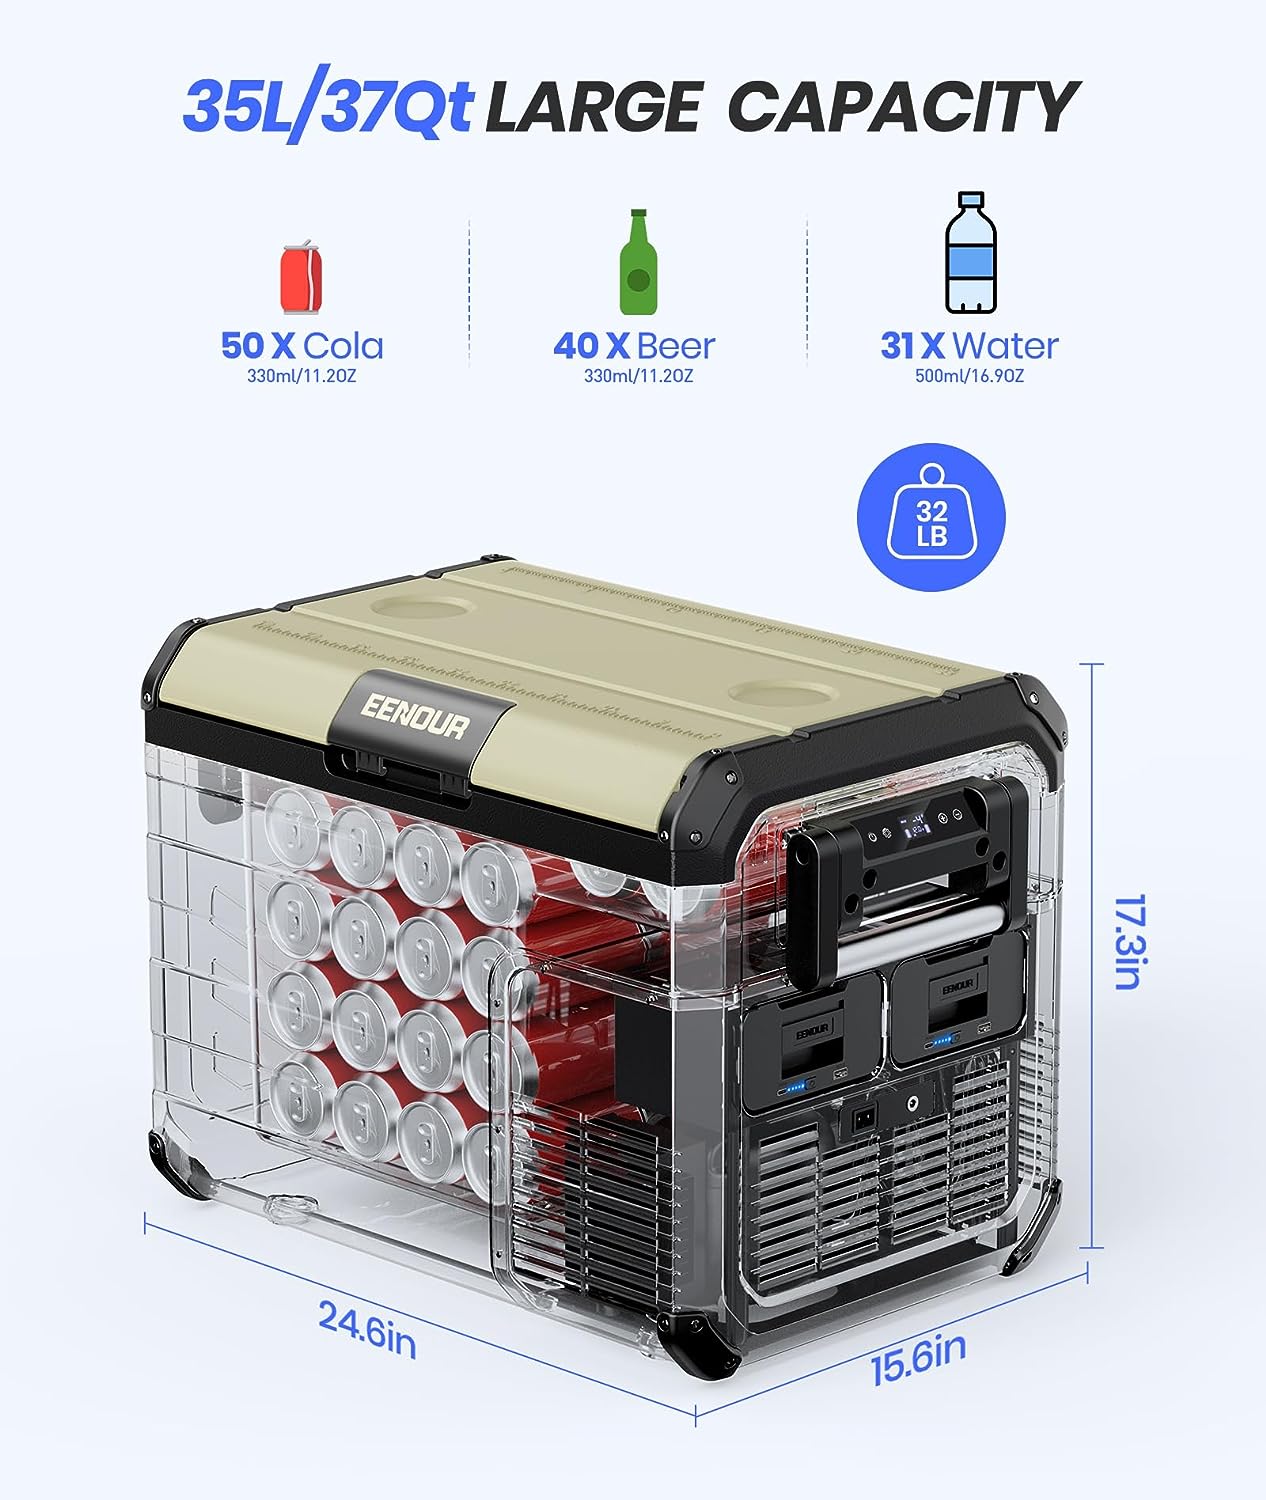 Eenour Portable Cooler With Solar Power Capacity